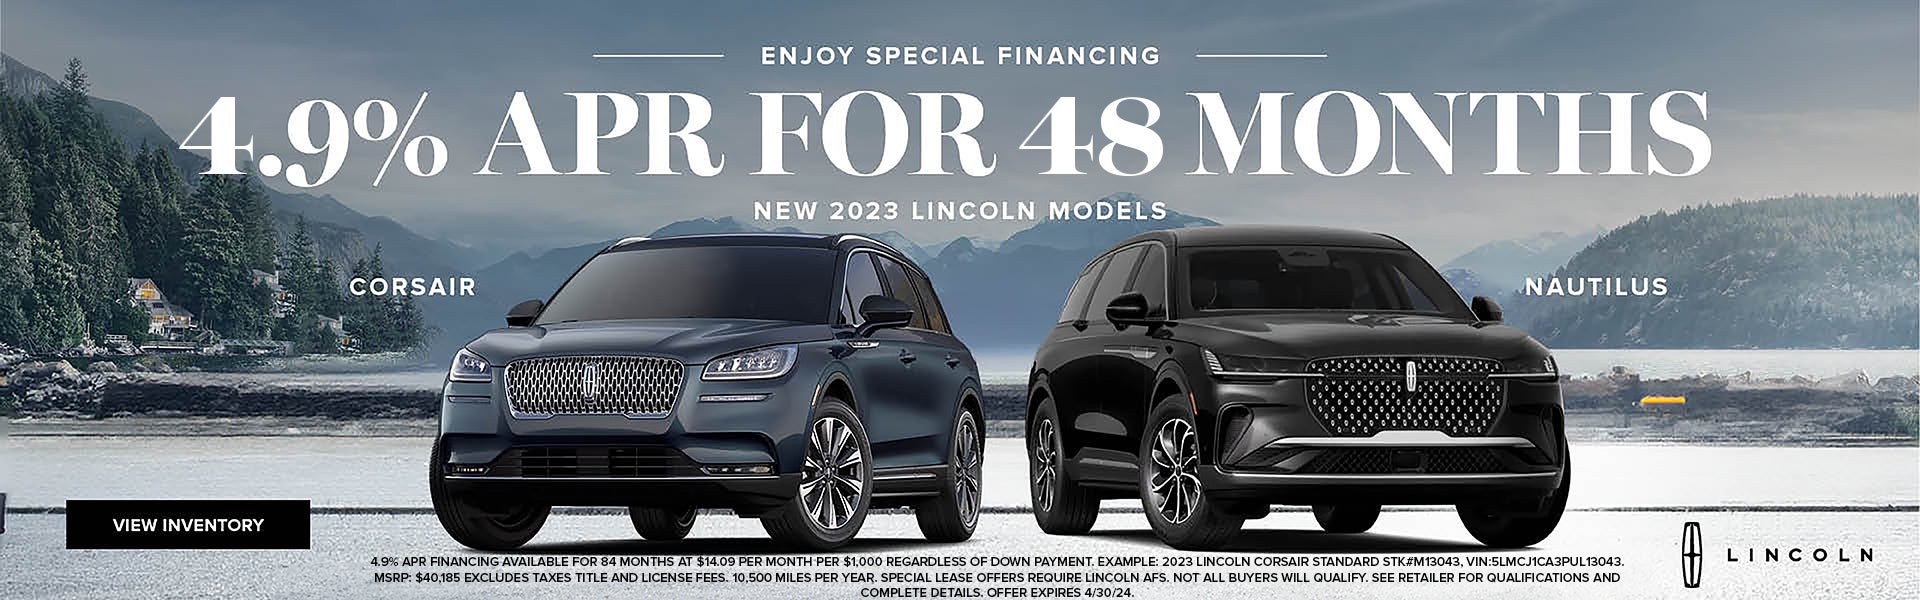 Enjoy Special Financing on New 2023 Lincoln Models 